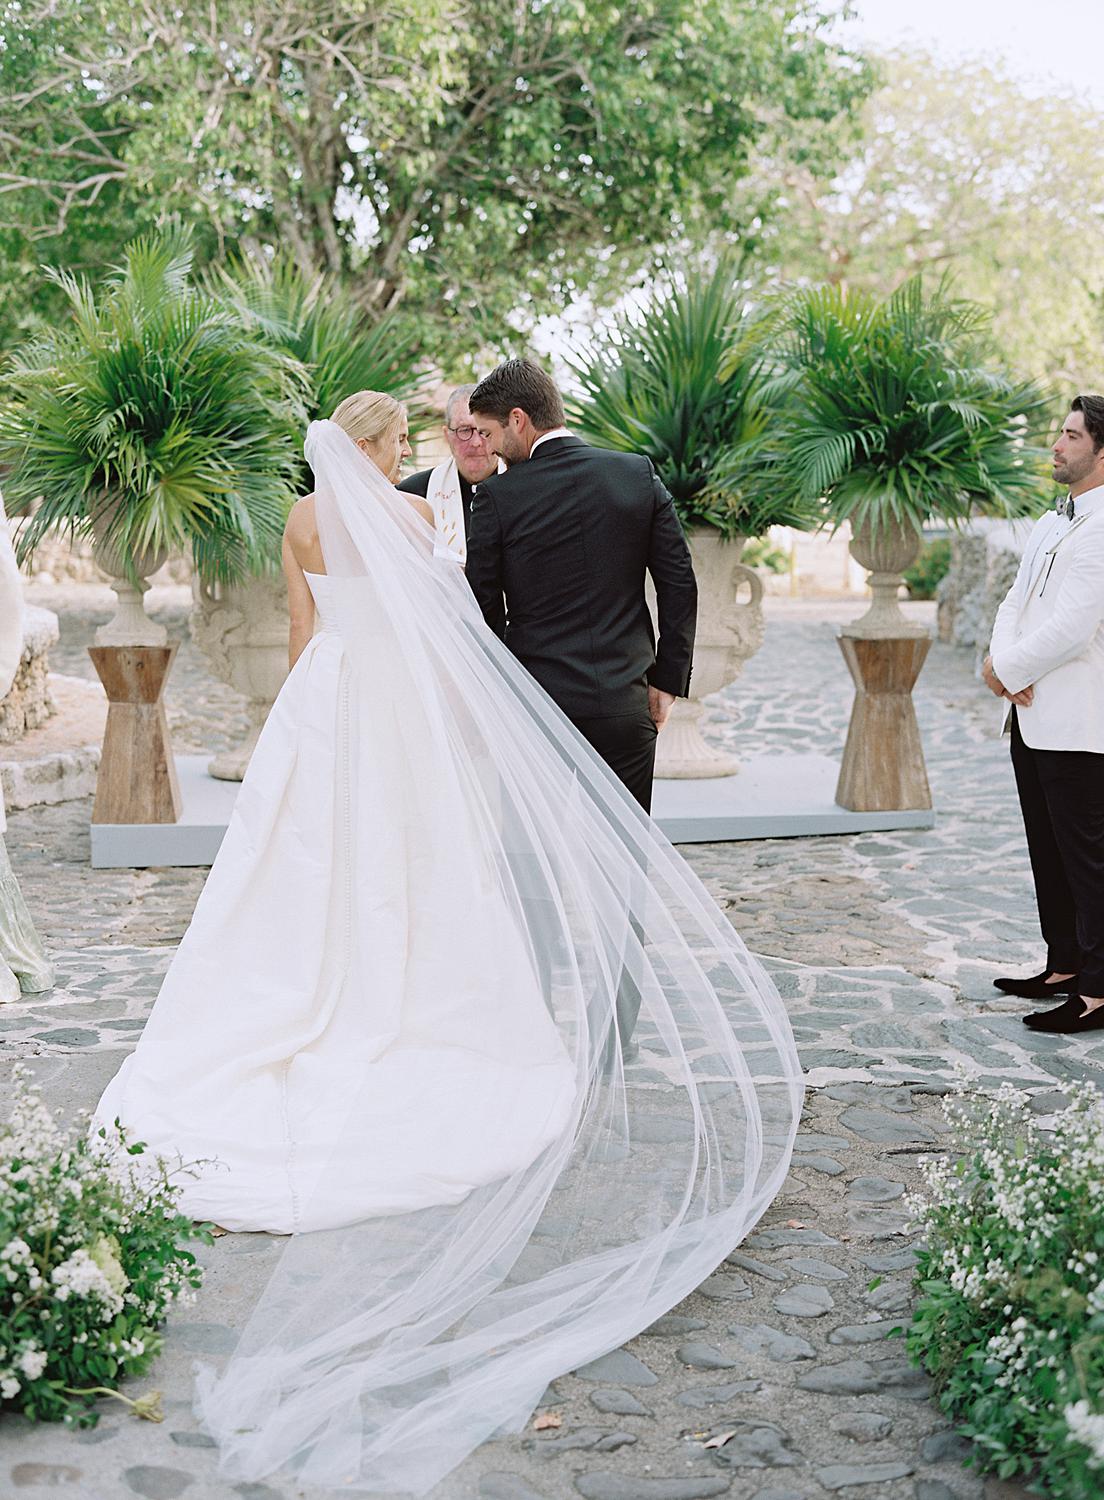 Brides veil as it is caught by the wind at their Altos de Chavón wedding.